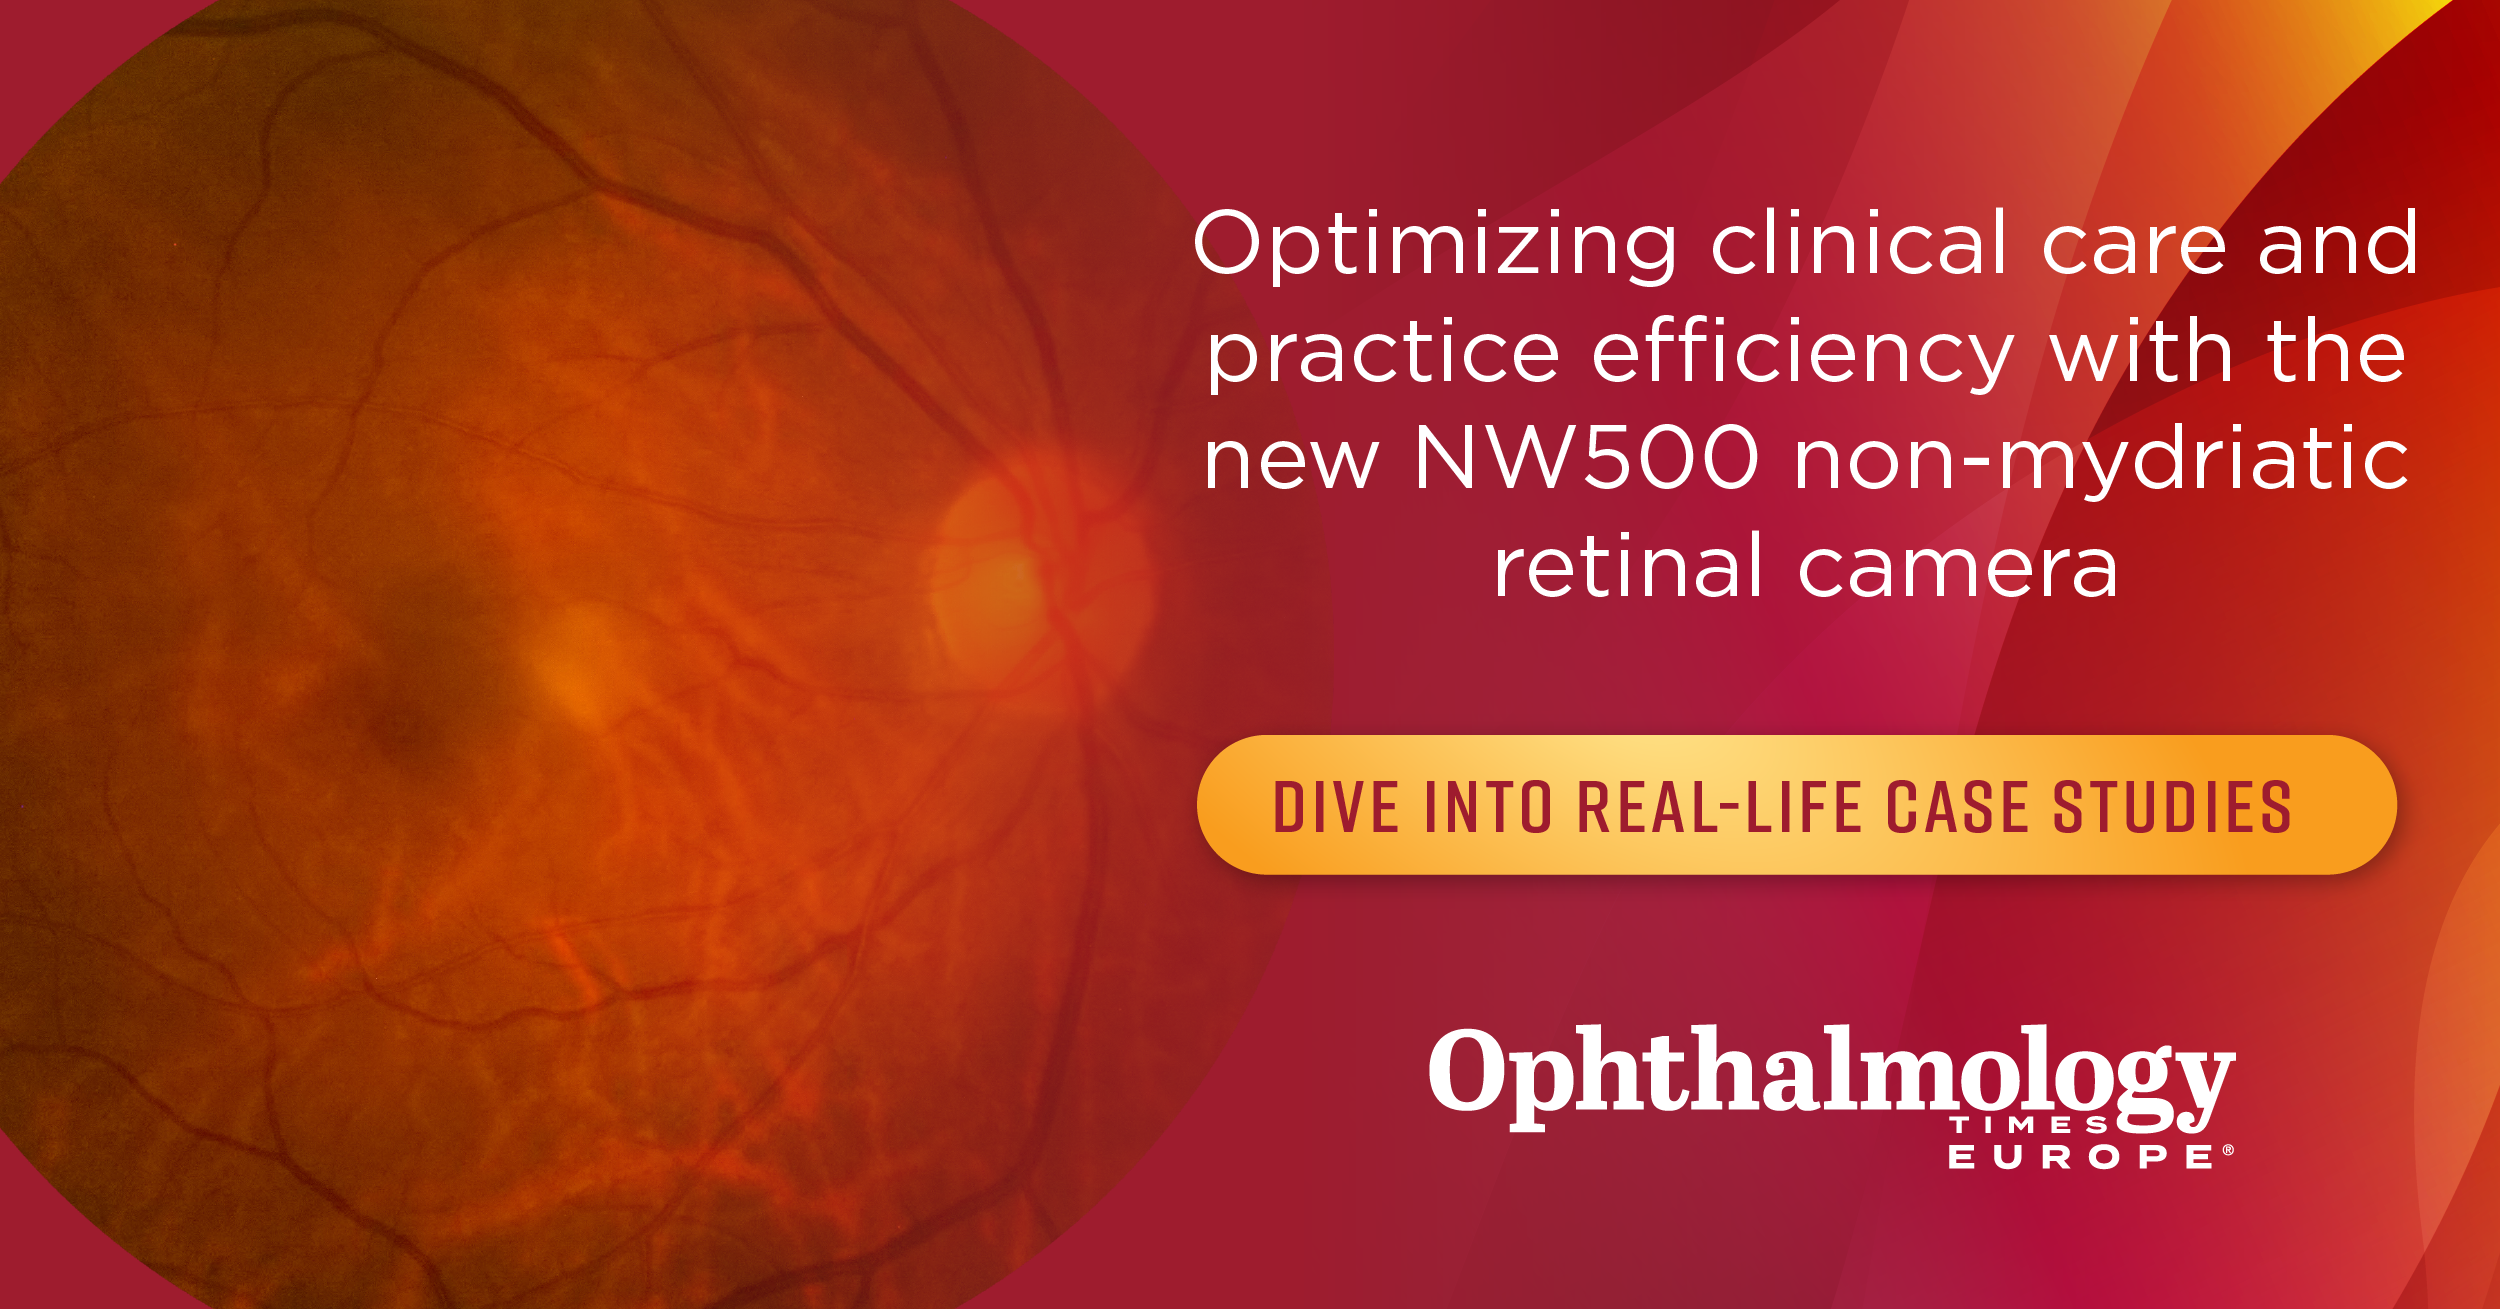 HORIZONS IN FUNDUS IMAGING: Enhancing reliability, quality, and workflow efficiency with the NW500 non-mydriatic retinal camera